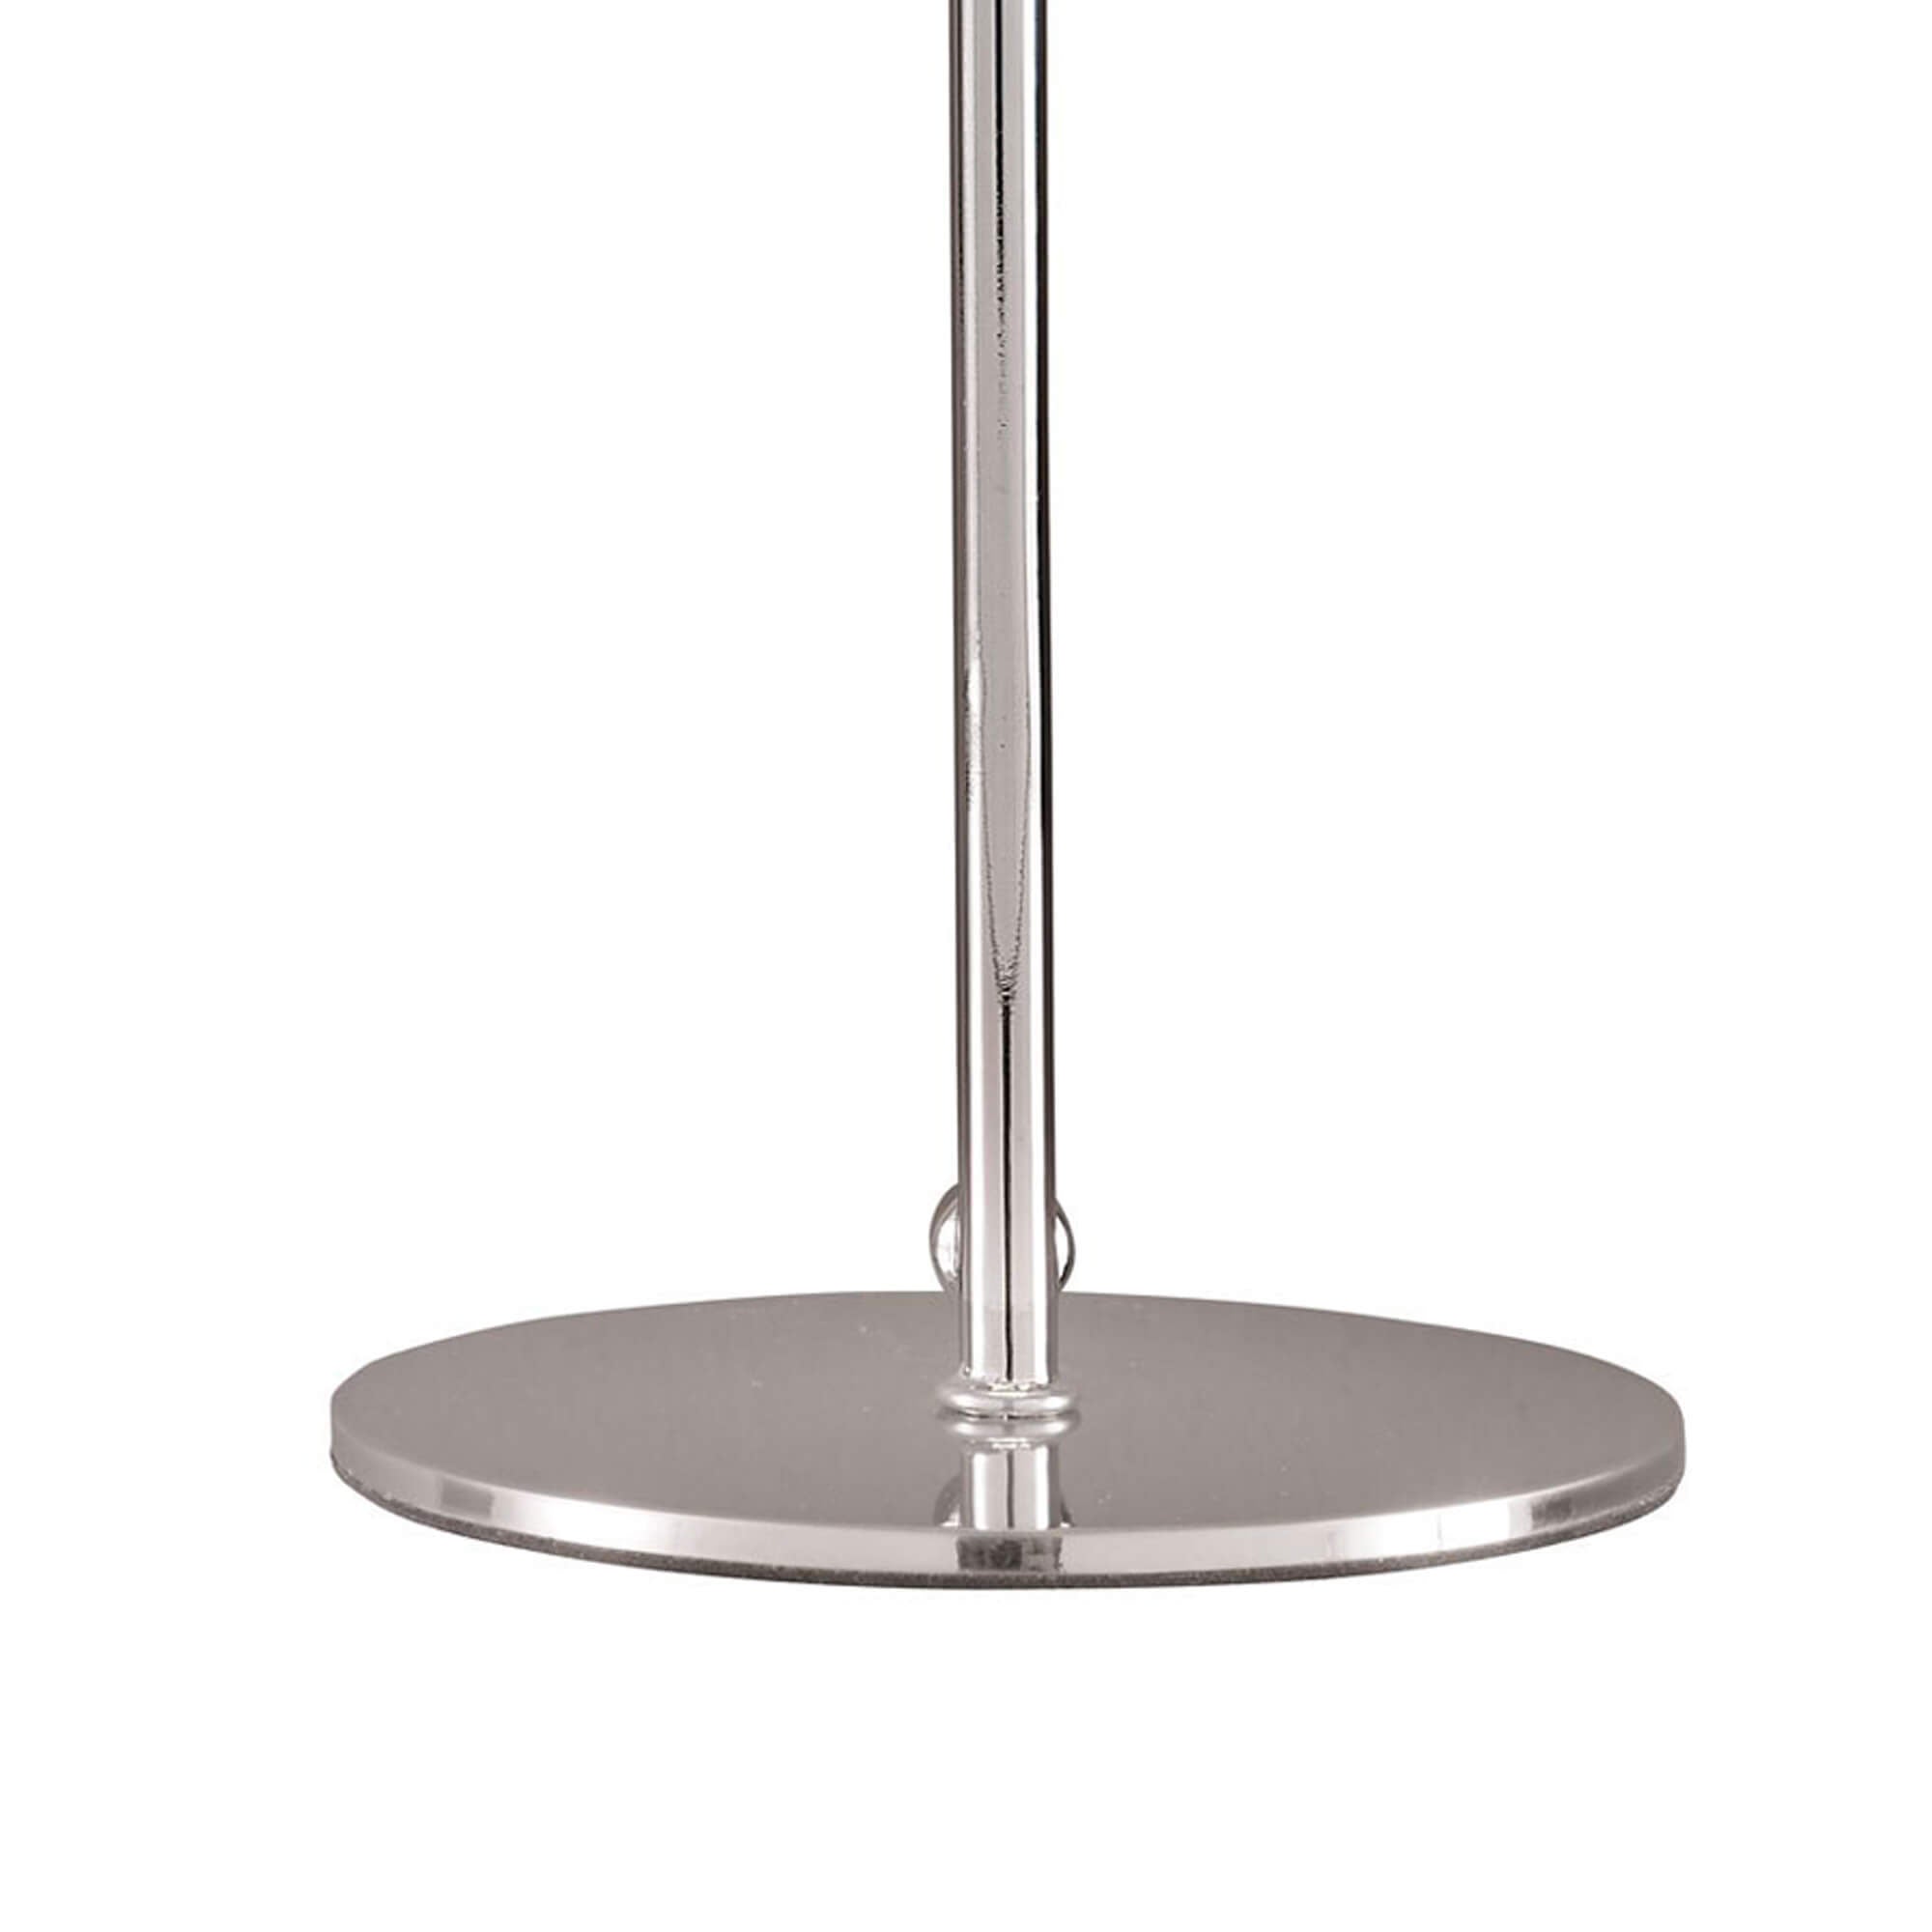 LA Collection Vienna Table Lamp Crystal/Chrome